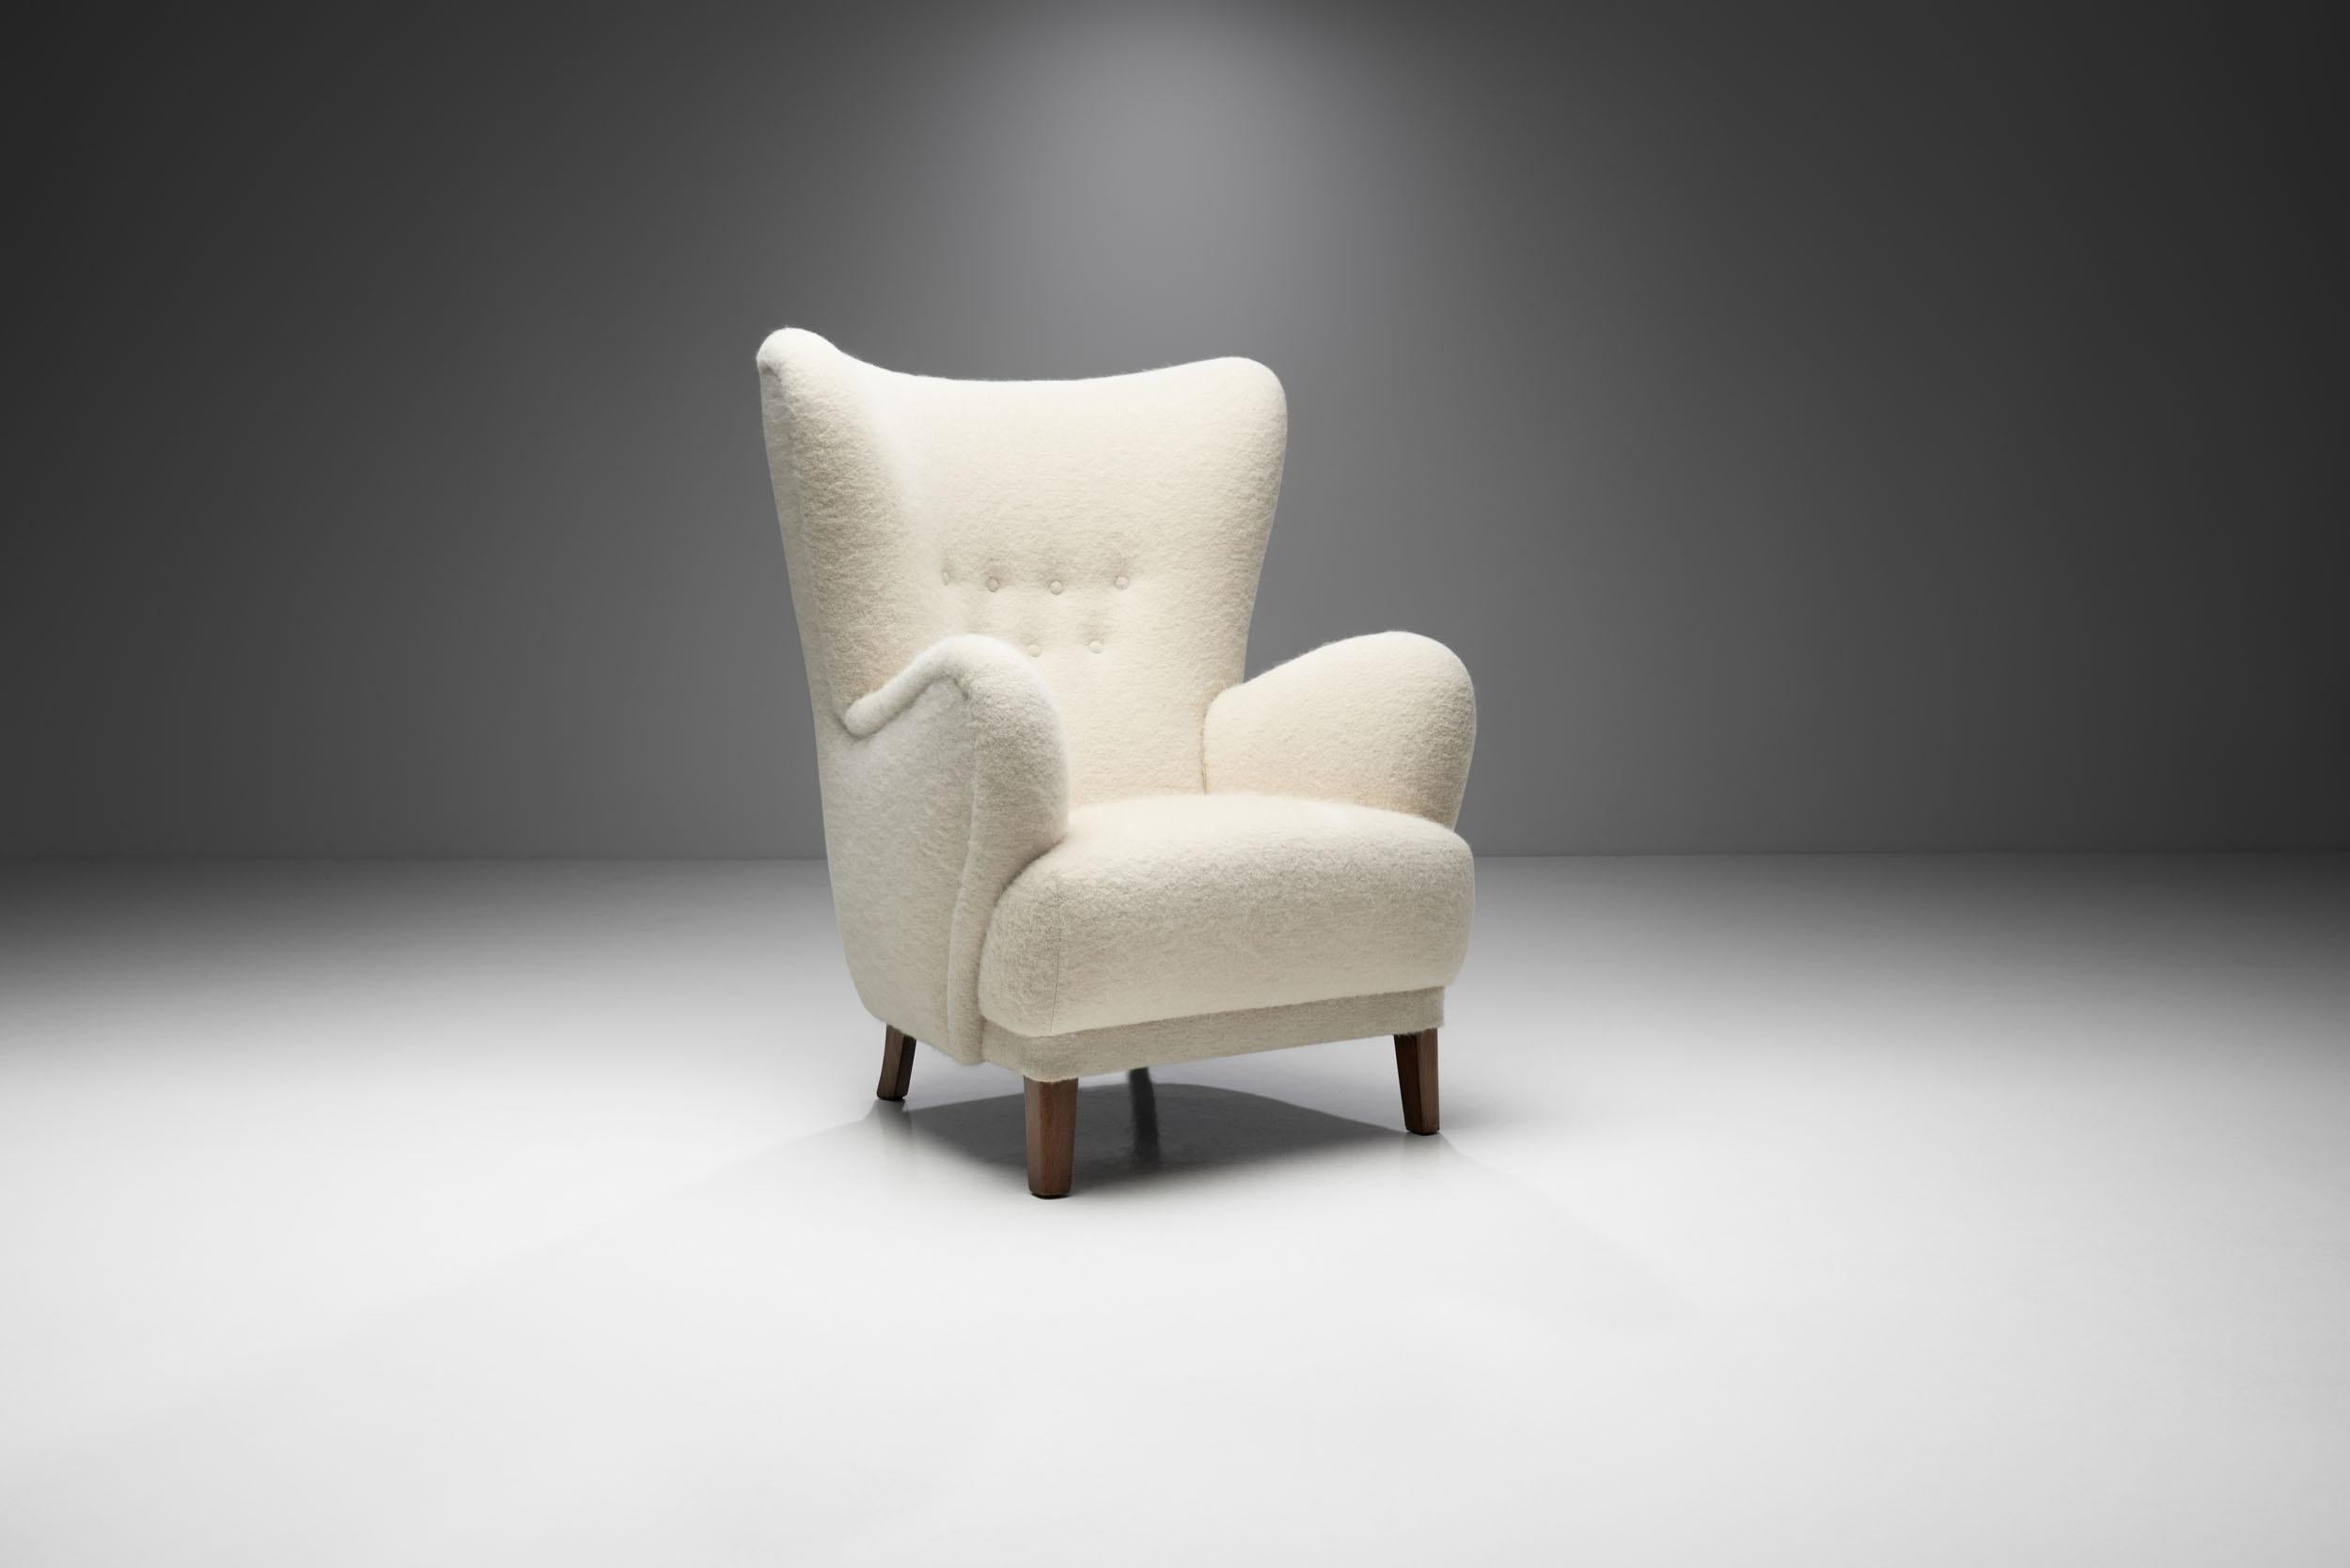 Throughout Scandinavia, there's a long history of pride in craftsmanship using natural materials like wood. This is especially true of Denmark. This beautiful wingback chair is a great representation of the quality and craftsmanship of Danish master